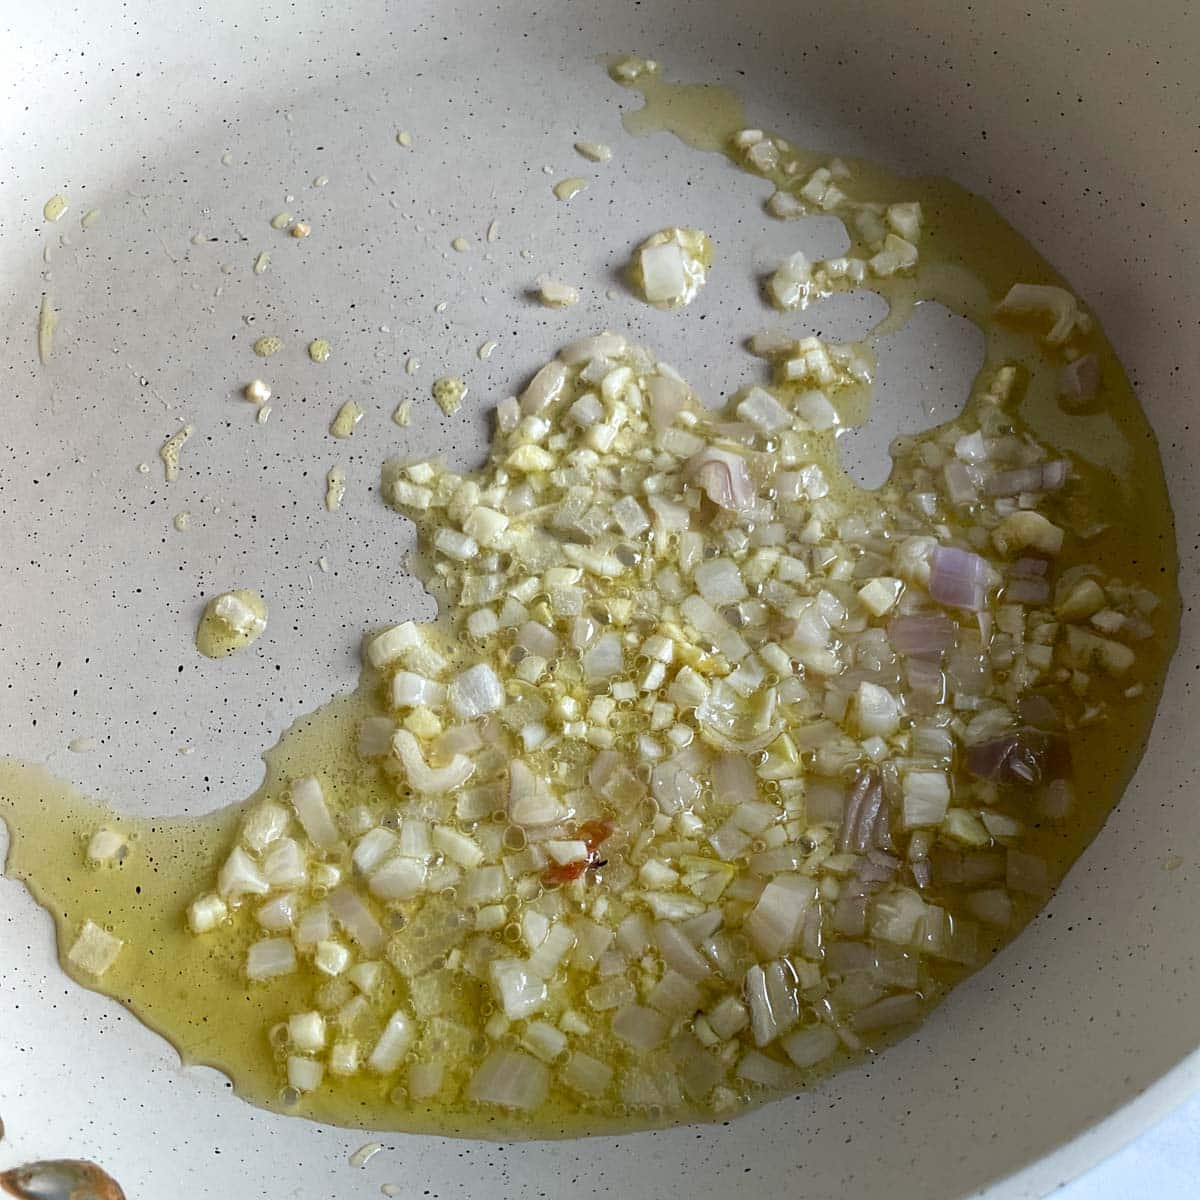 Garlic and shallot are shown sweating in olive oil in a white frying pan.